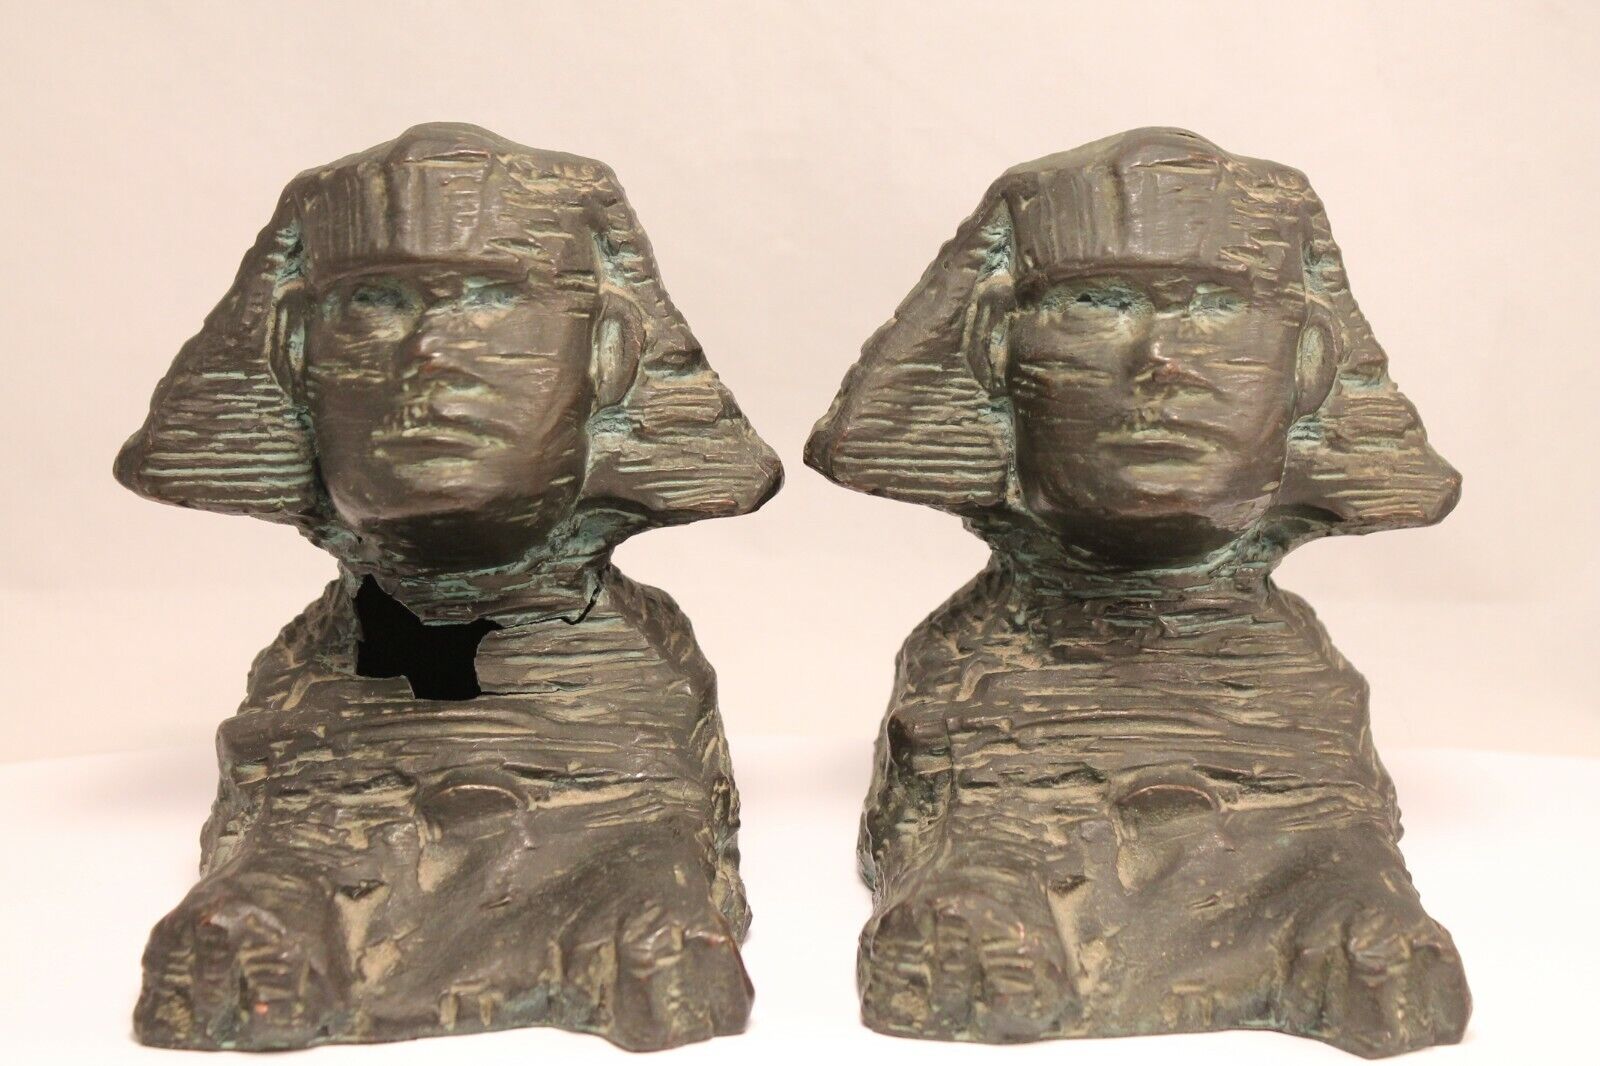 WEIDLICH BROTHERS GREAT SPHINX OF GIZA BOOKENDS